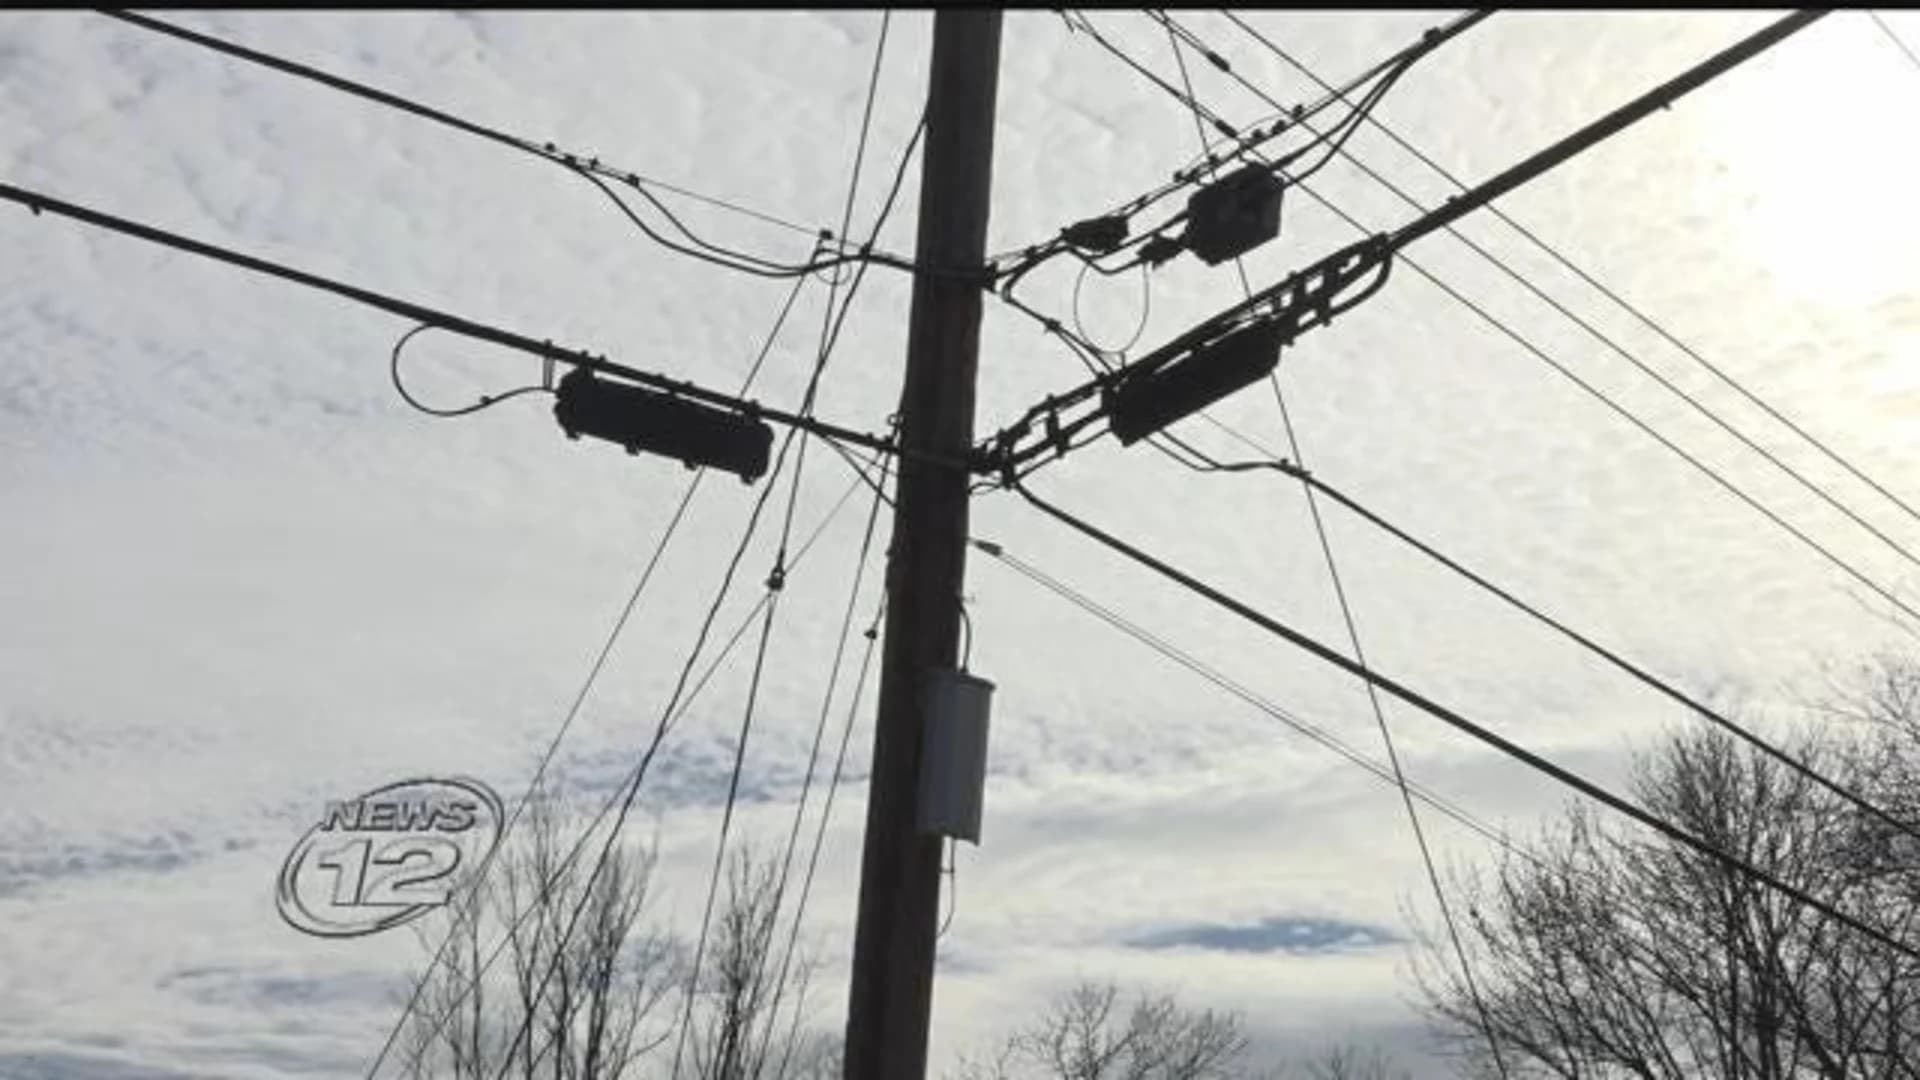 Utility customers could get refunds thanks to tax plan